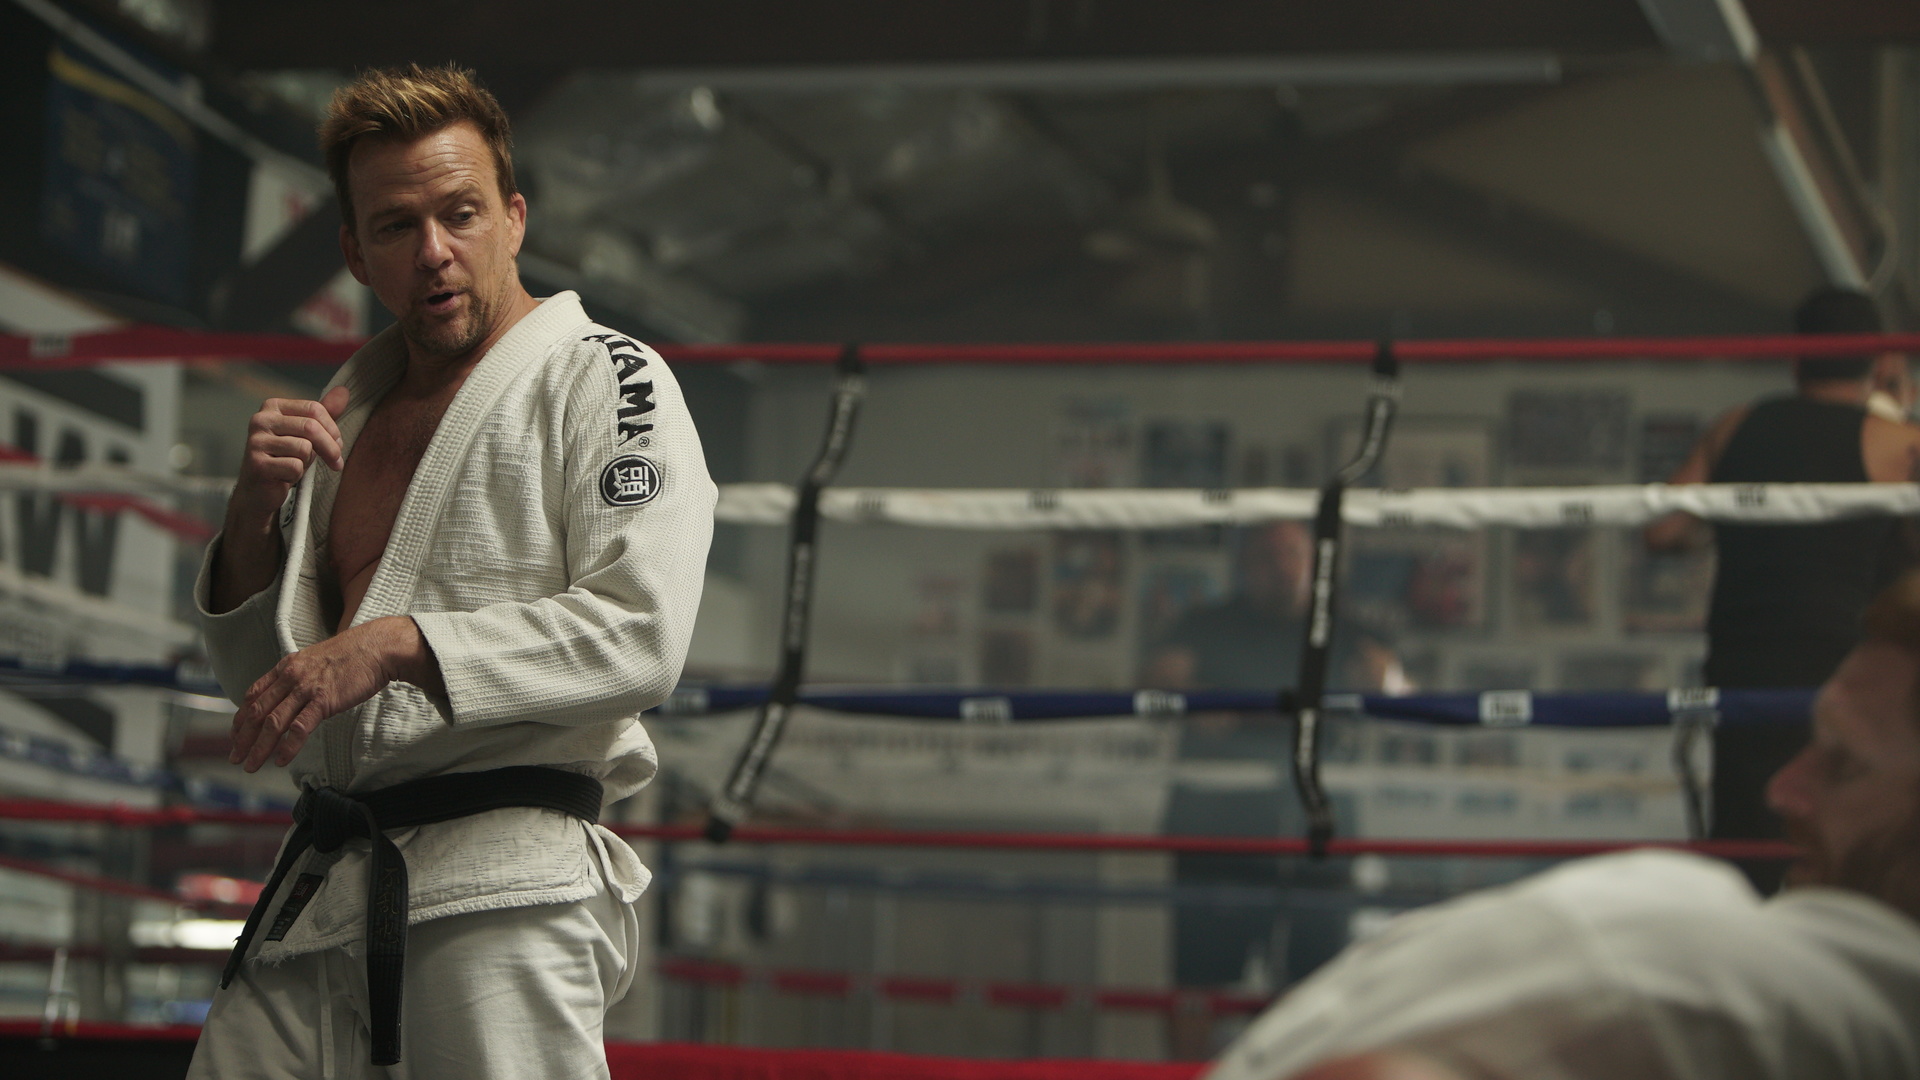 Sean Patrick Flanery brings his passion for Jujitsu to the screen in 'Born A Champion.'